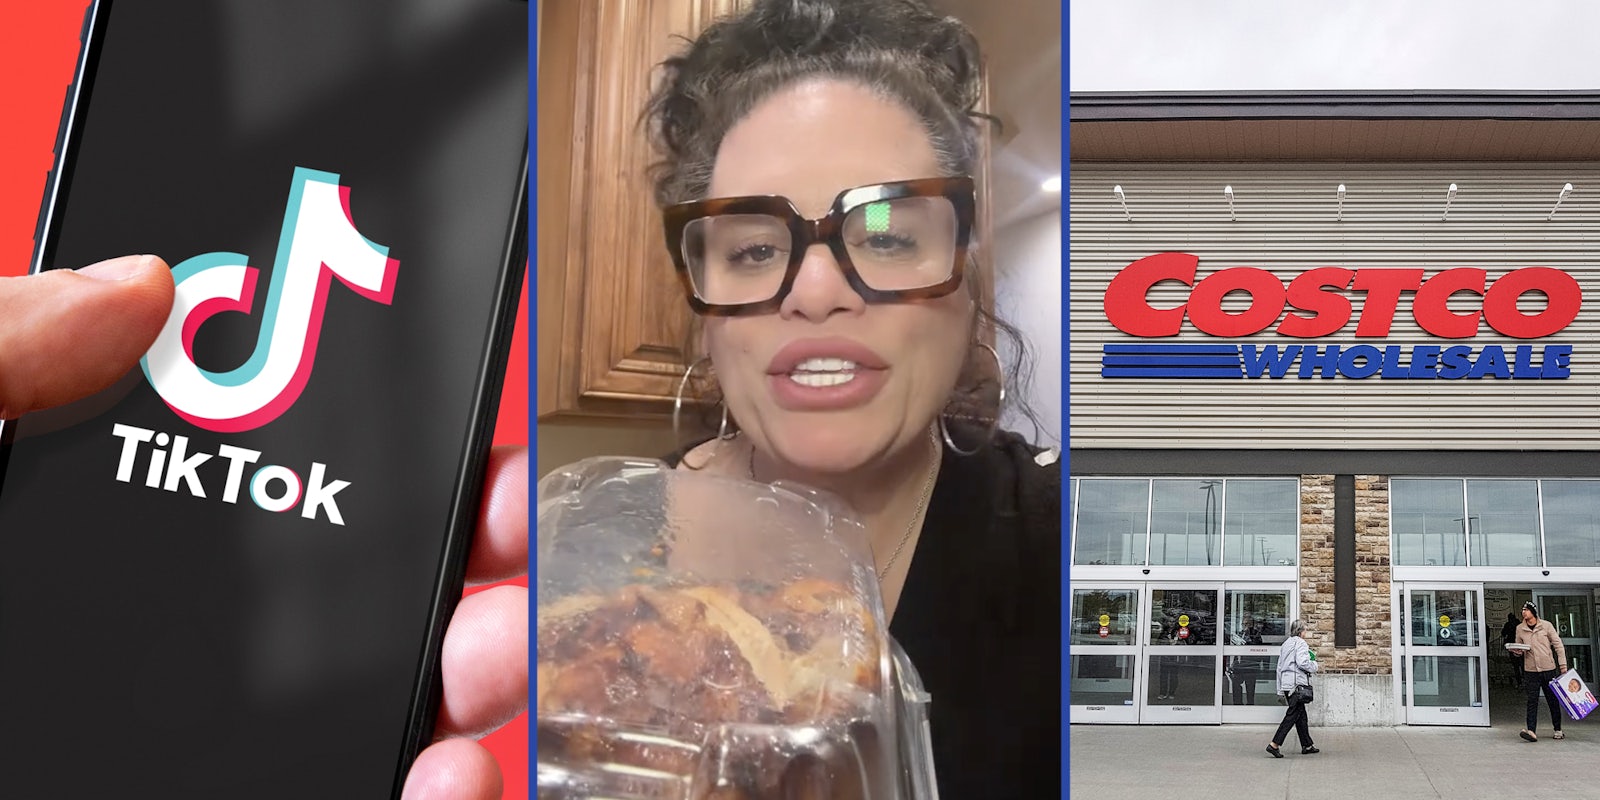 Hand holding phone with tiktok app(l), Woman with chicken(c), Costco store(r)